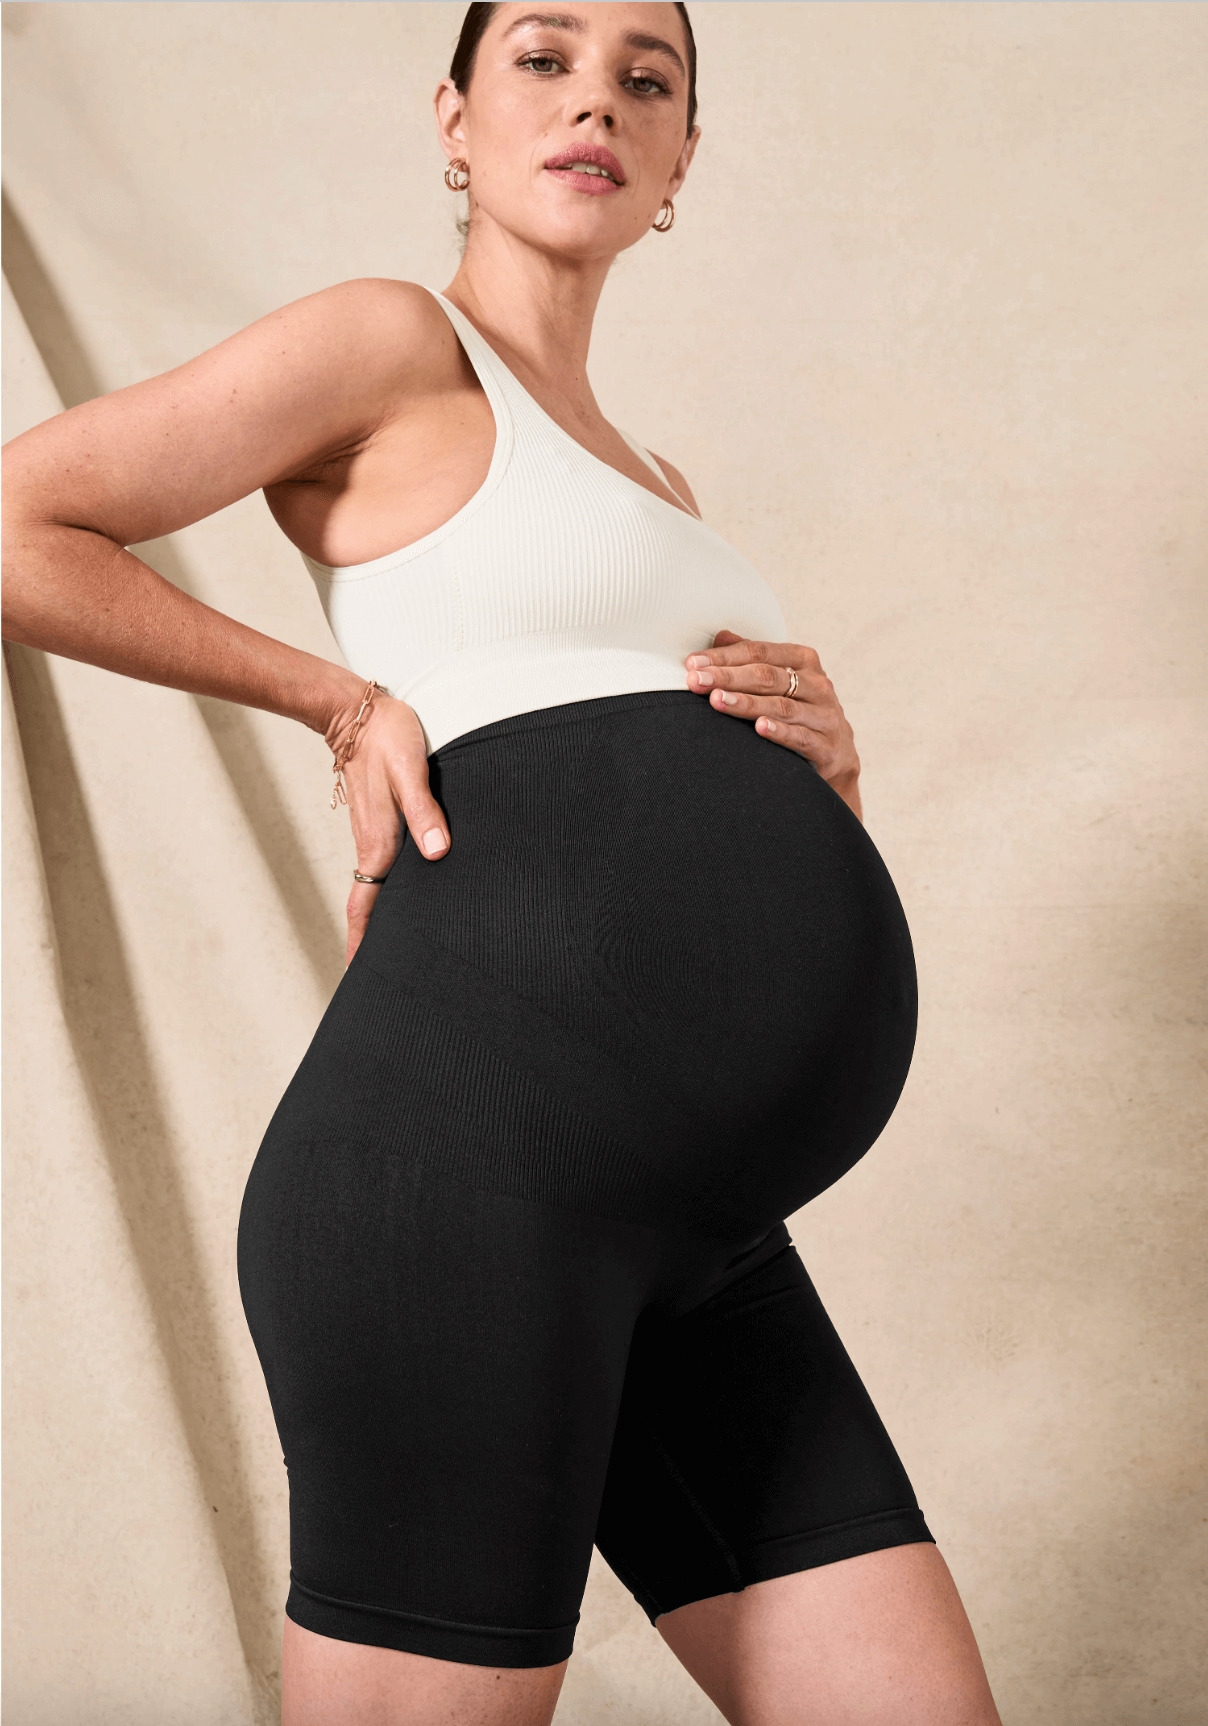 BLANQI® Everyday™ Maternity Built-in Support BellyBand